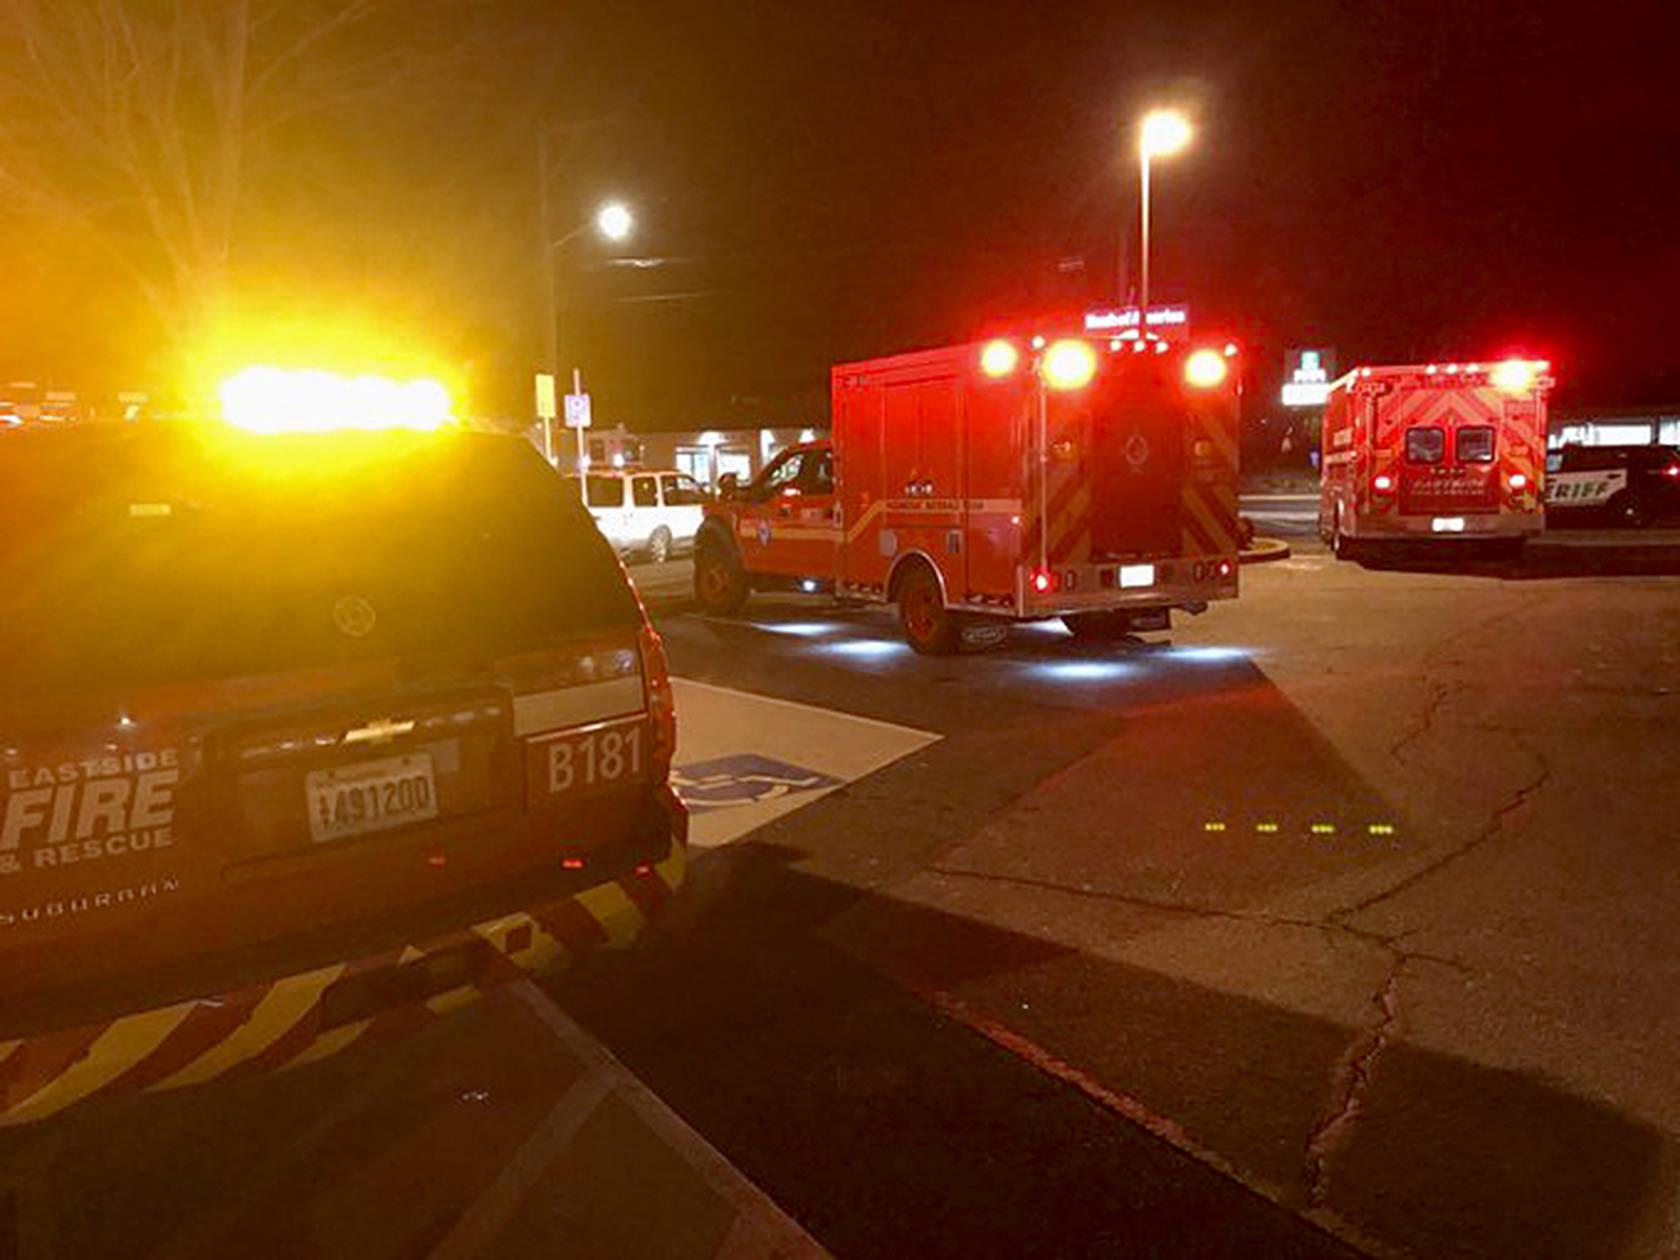 Responders made a showing outside the North Bend movie theater on Nov. 29, after someone called and reported a box they discovered. It was full of urine. Photo courtesy of Eastside Firefighters.